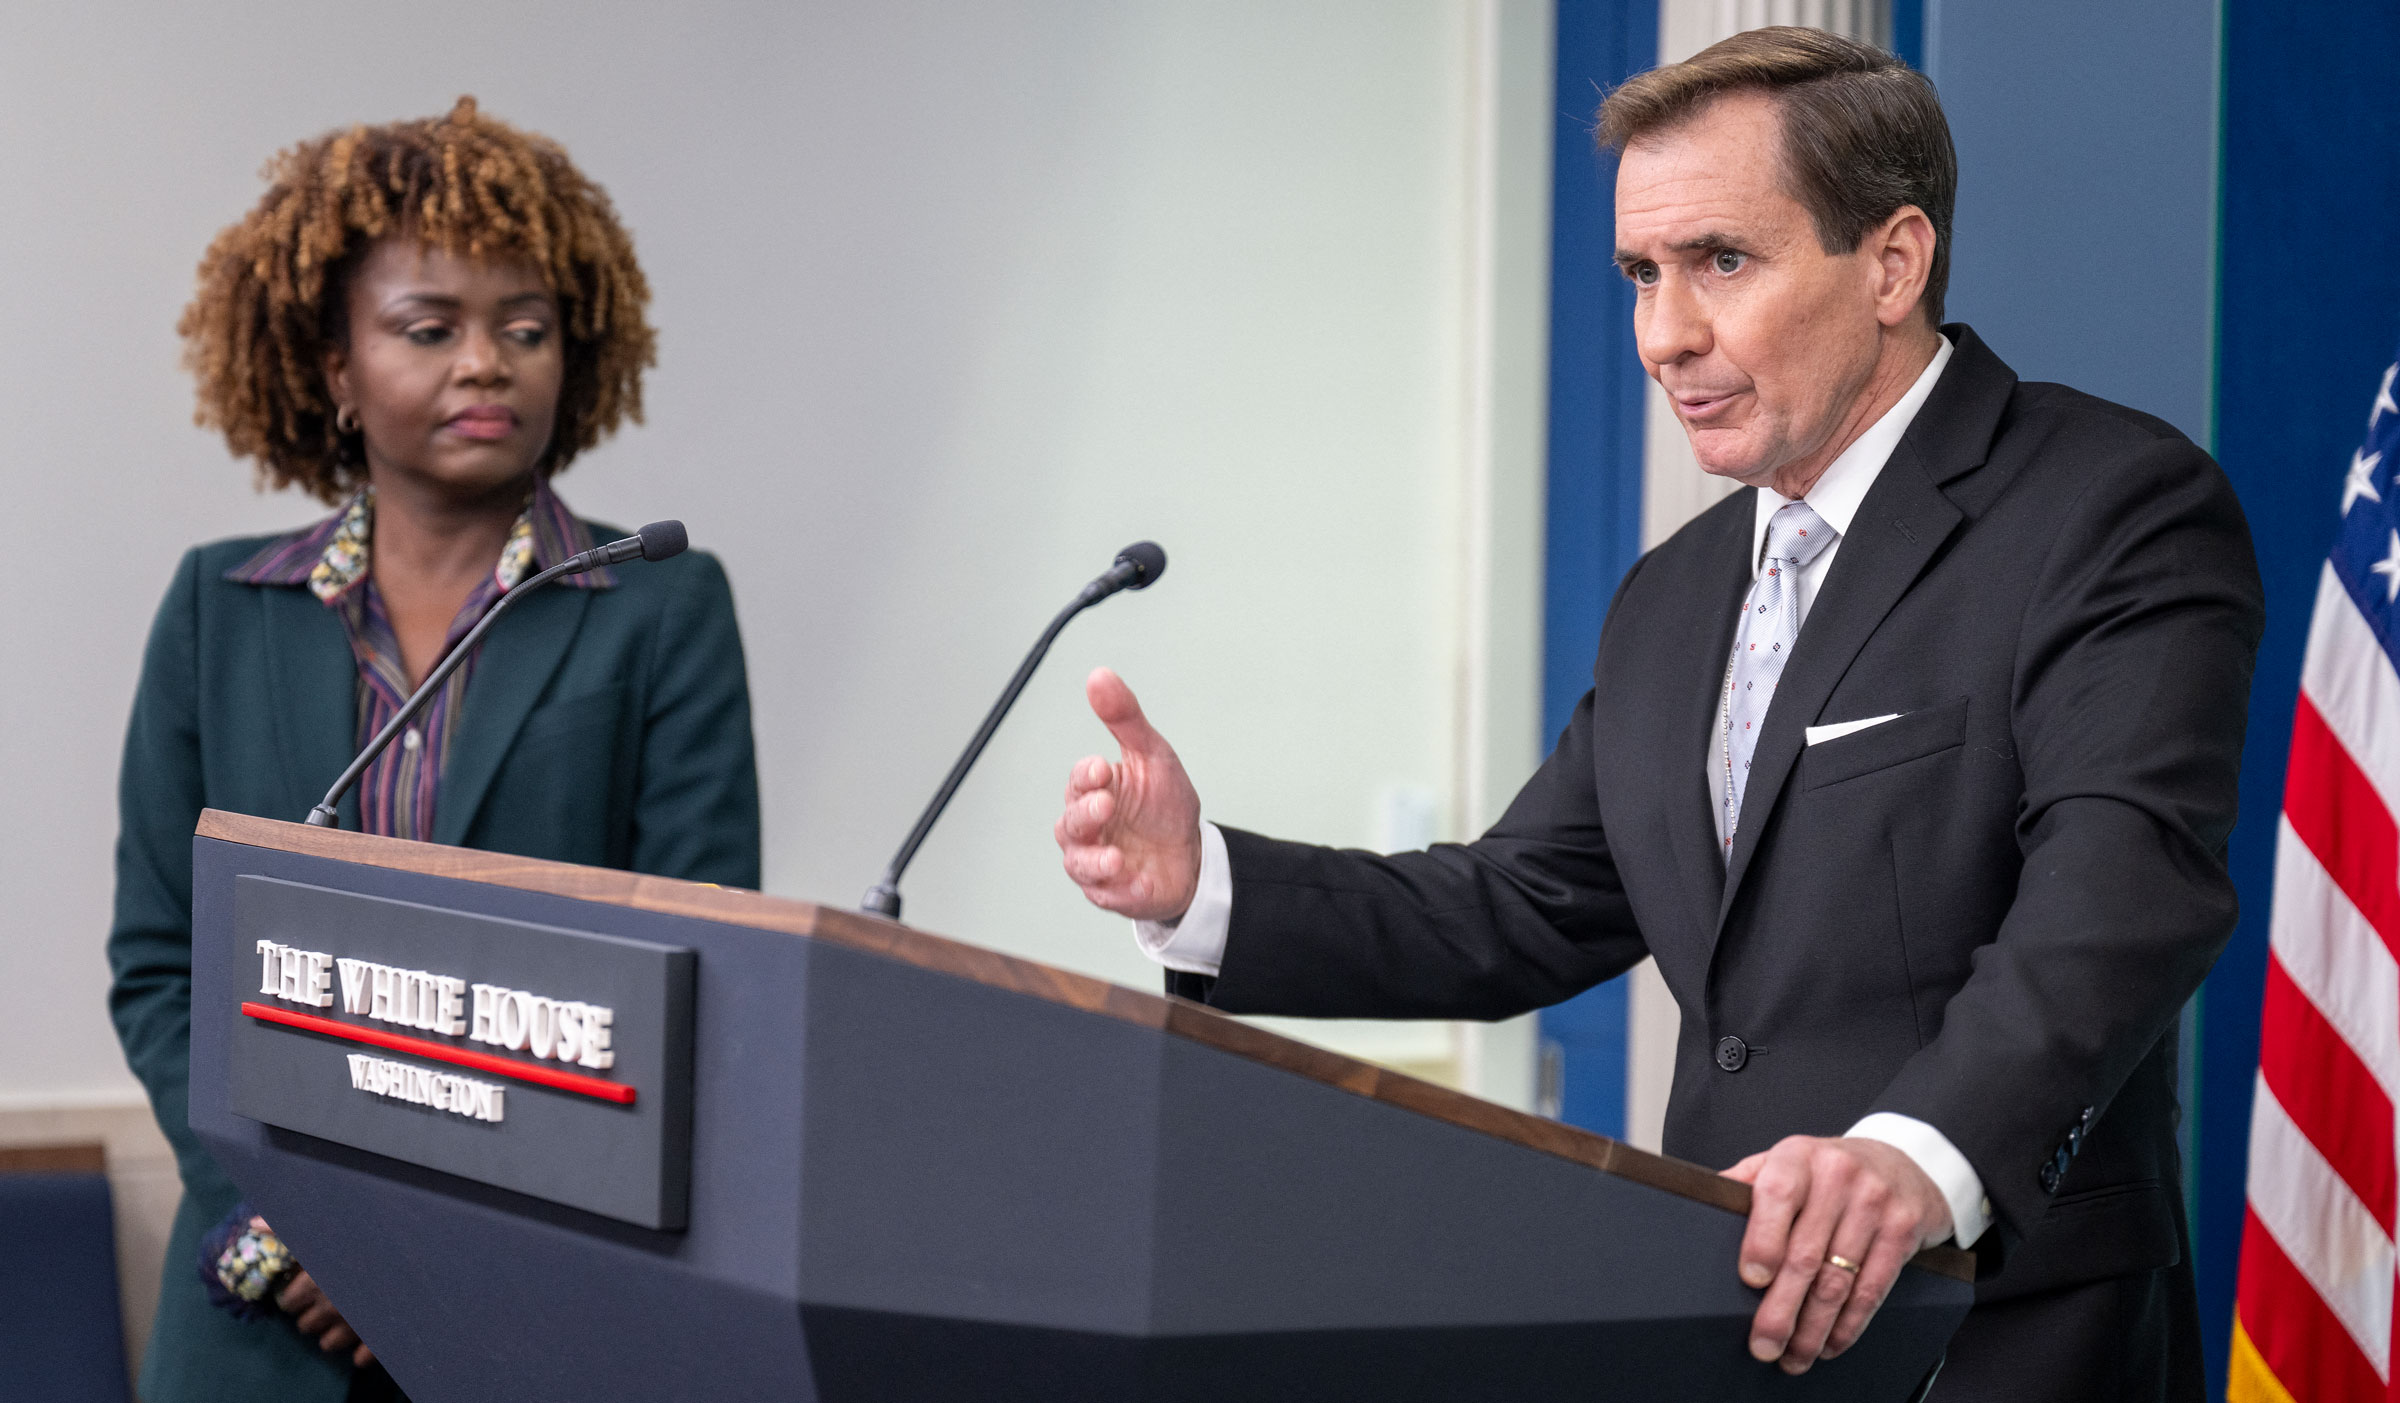 National Security Council spokesman John Kirby, next to White House press secretary Karine Jean-Pierre, speaks to reporters at a White House briefing on Friday.